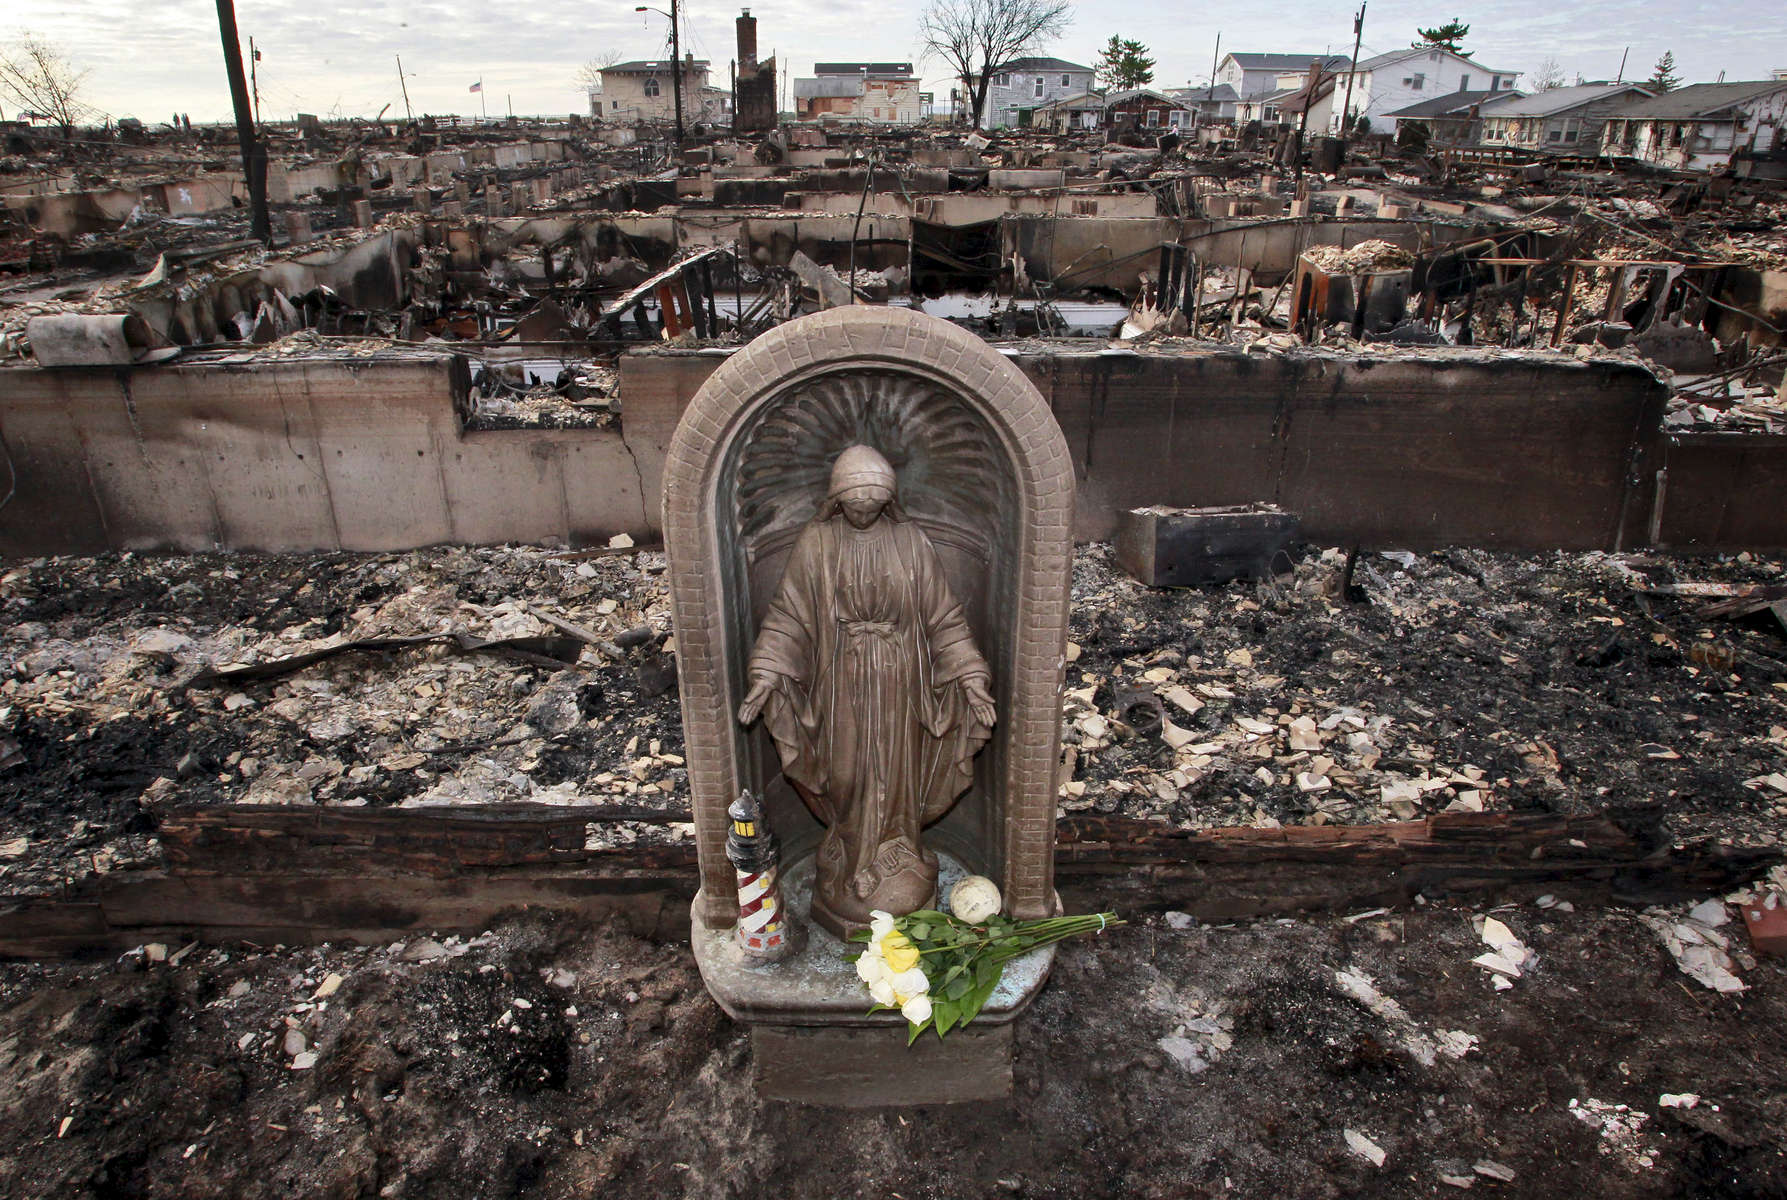 Flowers were laid in front of the statue of the virgin mary that survive the massive fire caused by hurricane Sandy in Breezy Point, New York on Friday,  November 2, 2012.